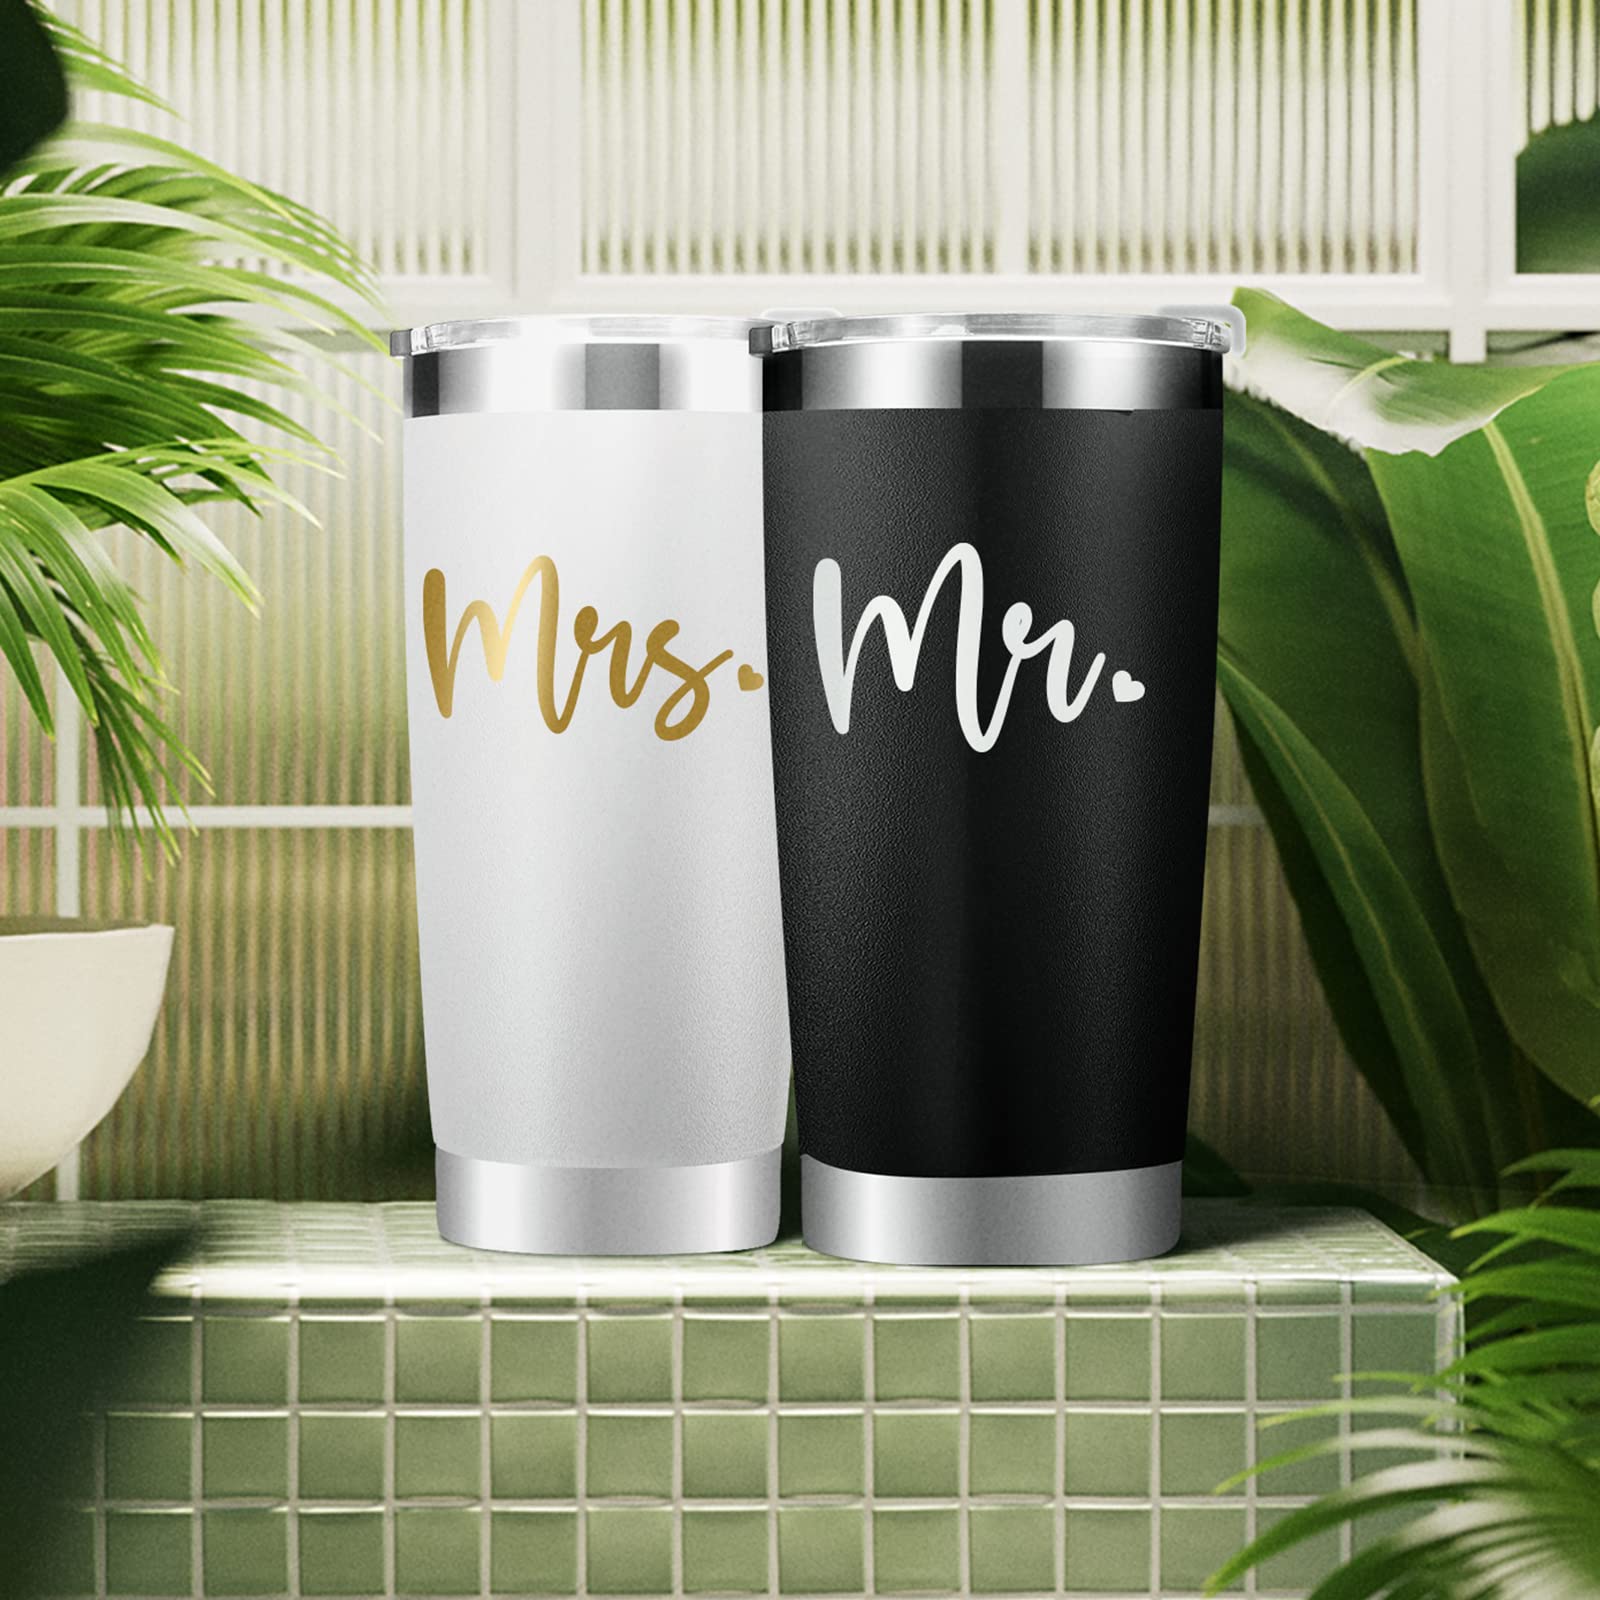 JETIKON Mr Mrs Travel Tumbler Apron Set Wedding Engagement Anniversary Valentine's Day Gifts for Couple Husband Wife Bride Groom His and Hers Newlyed Gifts 20oz Stainless Steel Insulated Tumbler